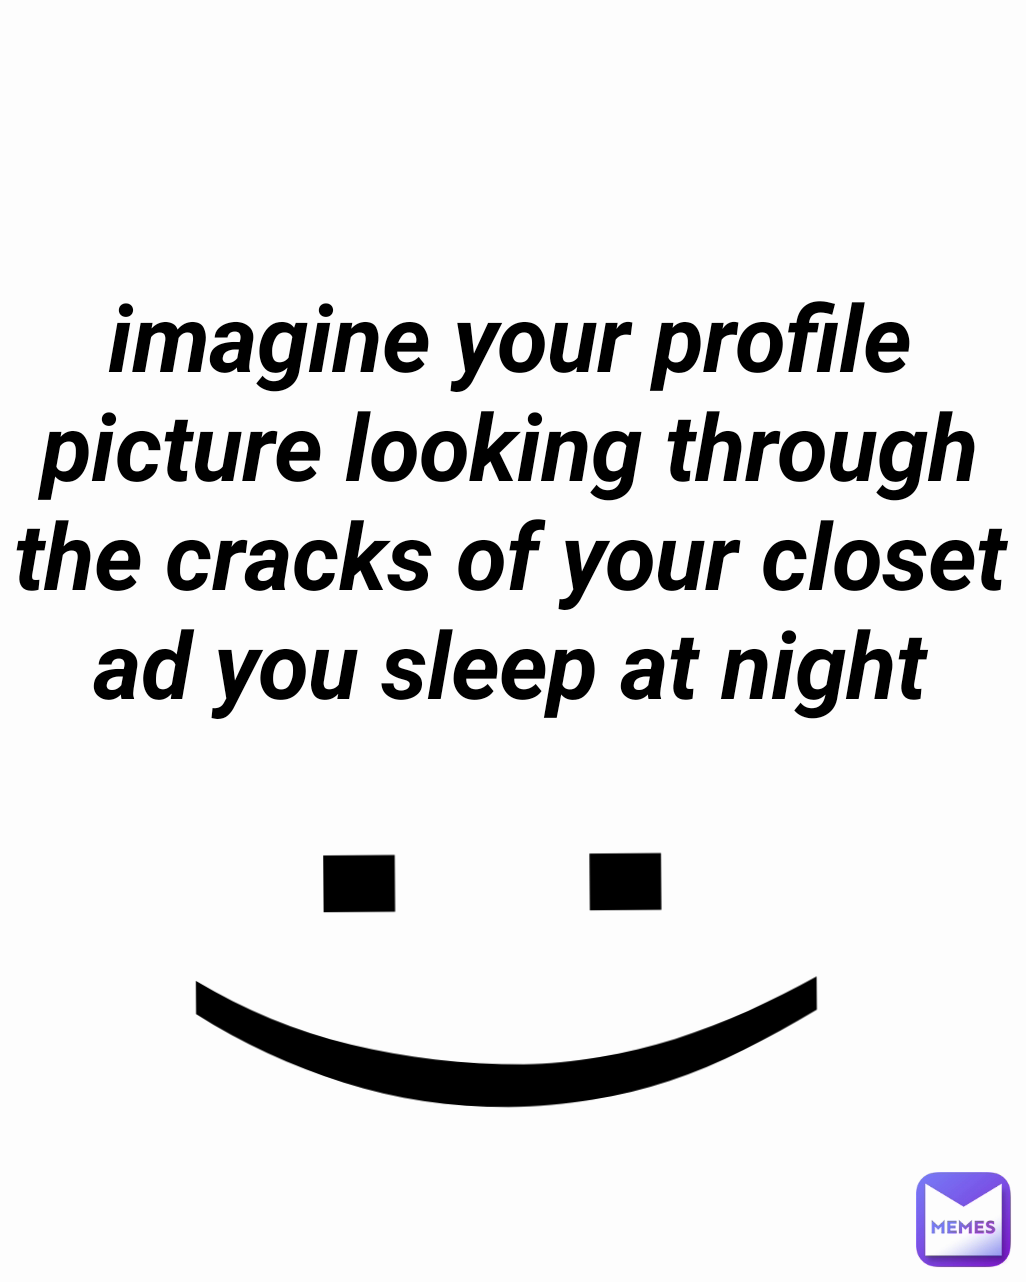 :) imagine your profile picture looking through the cracks of your closet ad you sleep at night